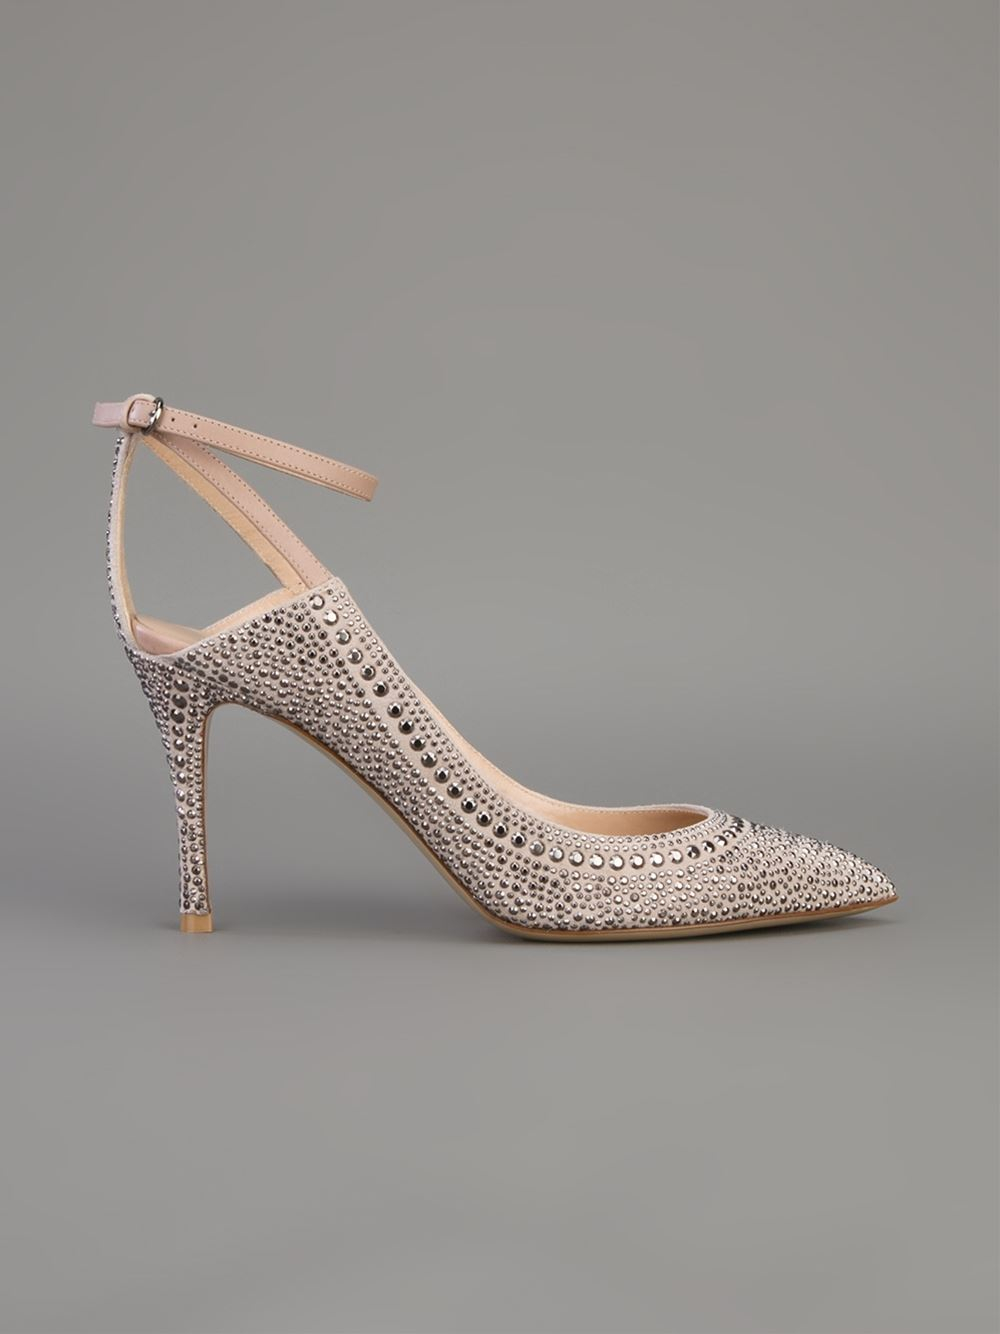 Lyst - Valentino Ankle Strap Sandal in Natural